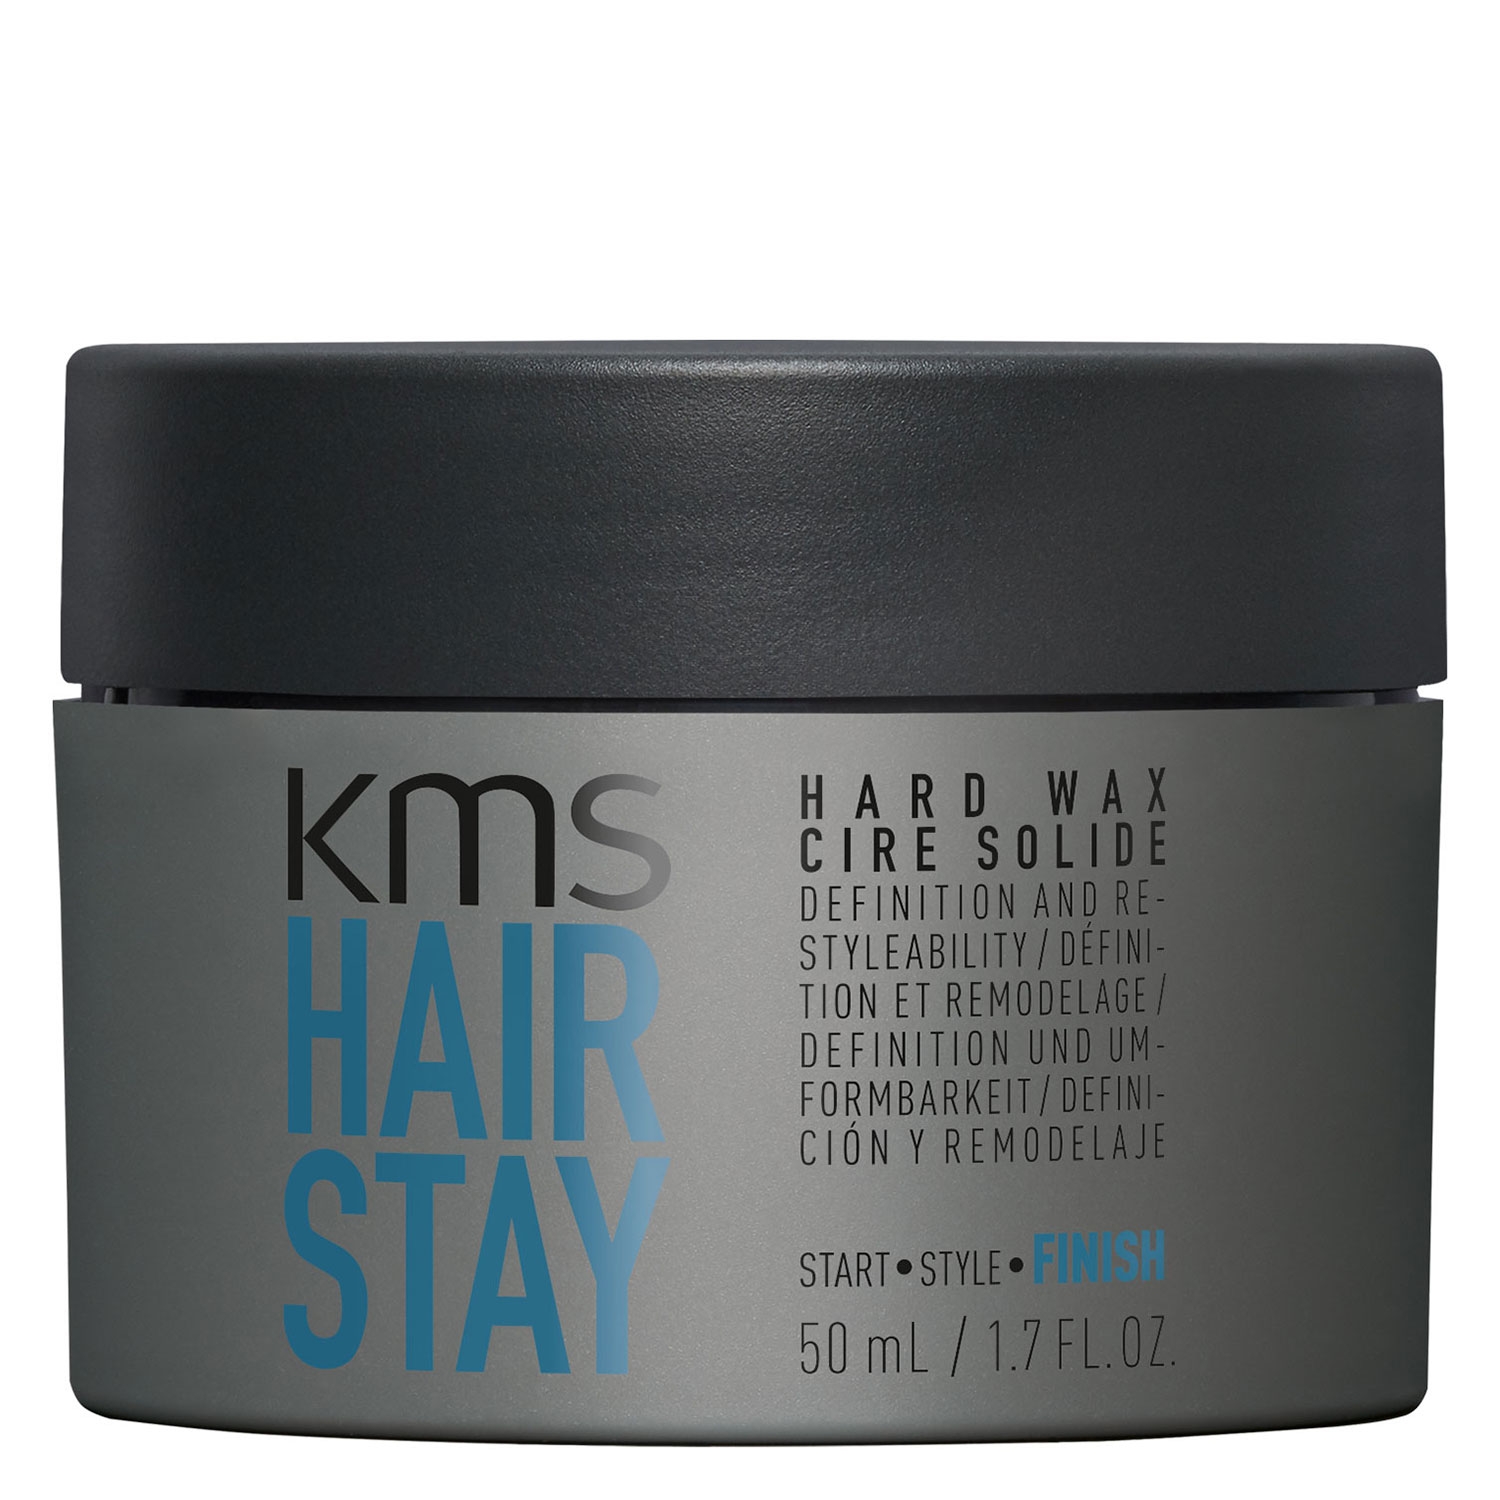 Product image from Hairstay - Hard Wax